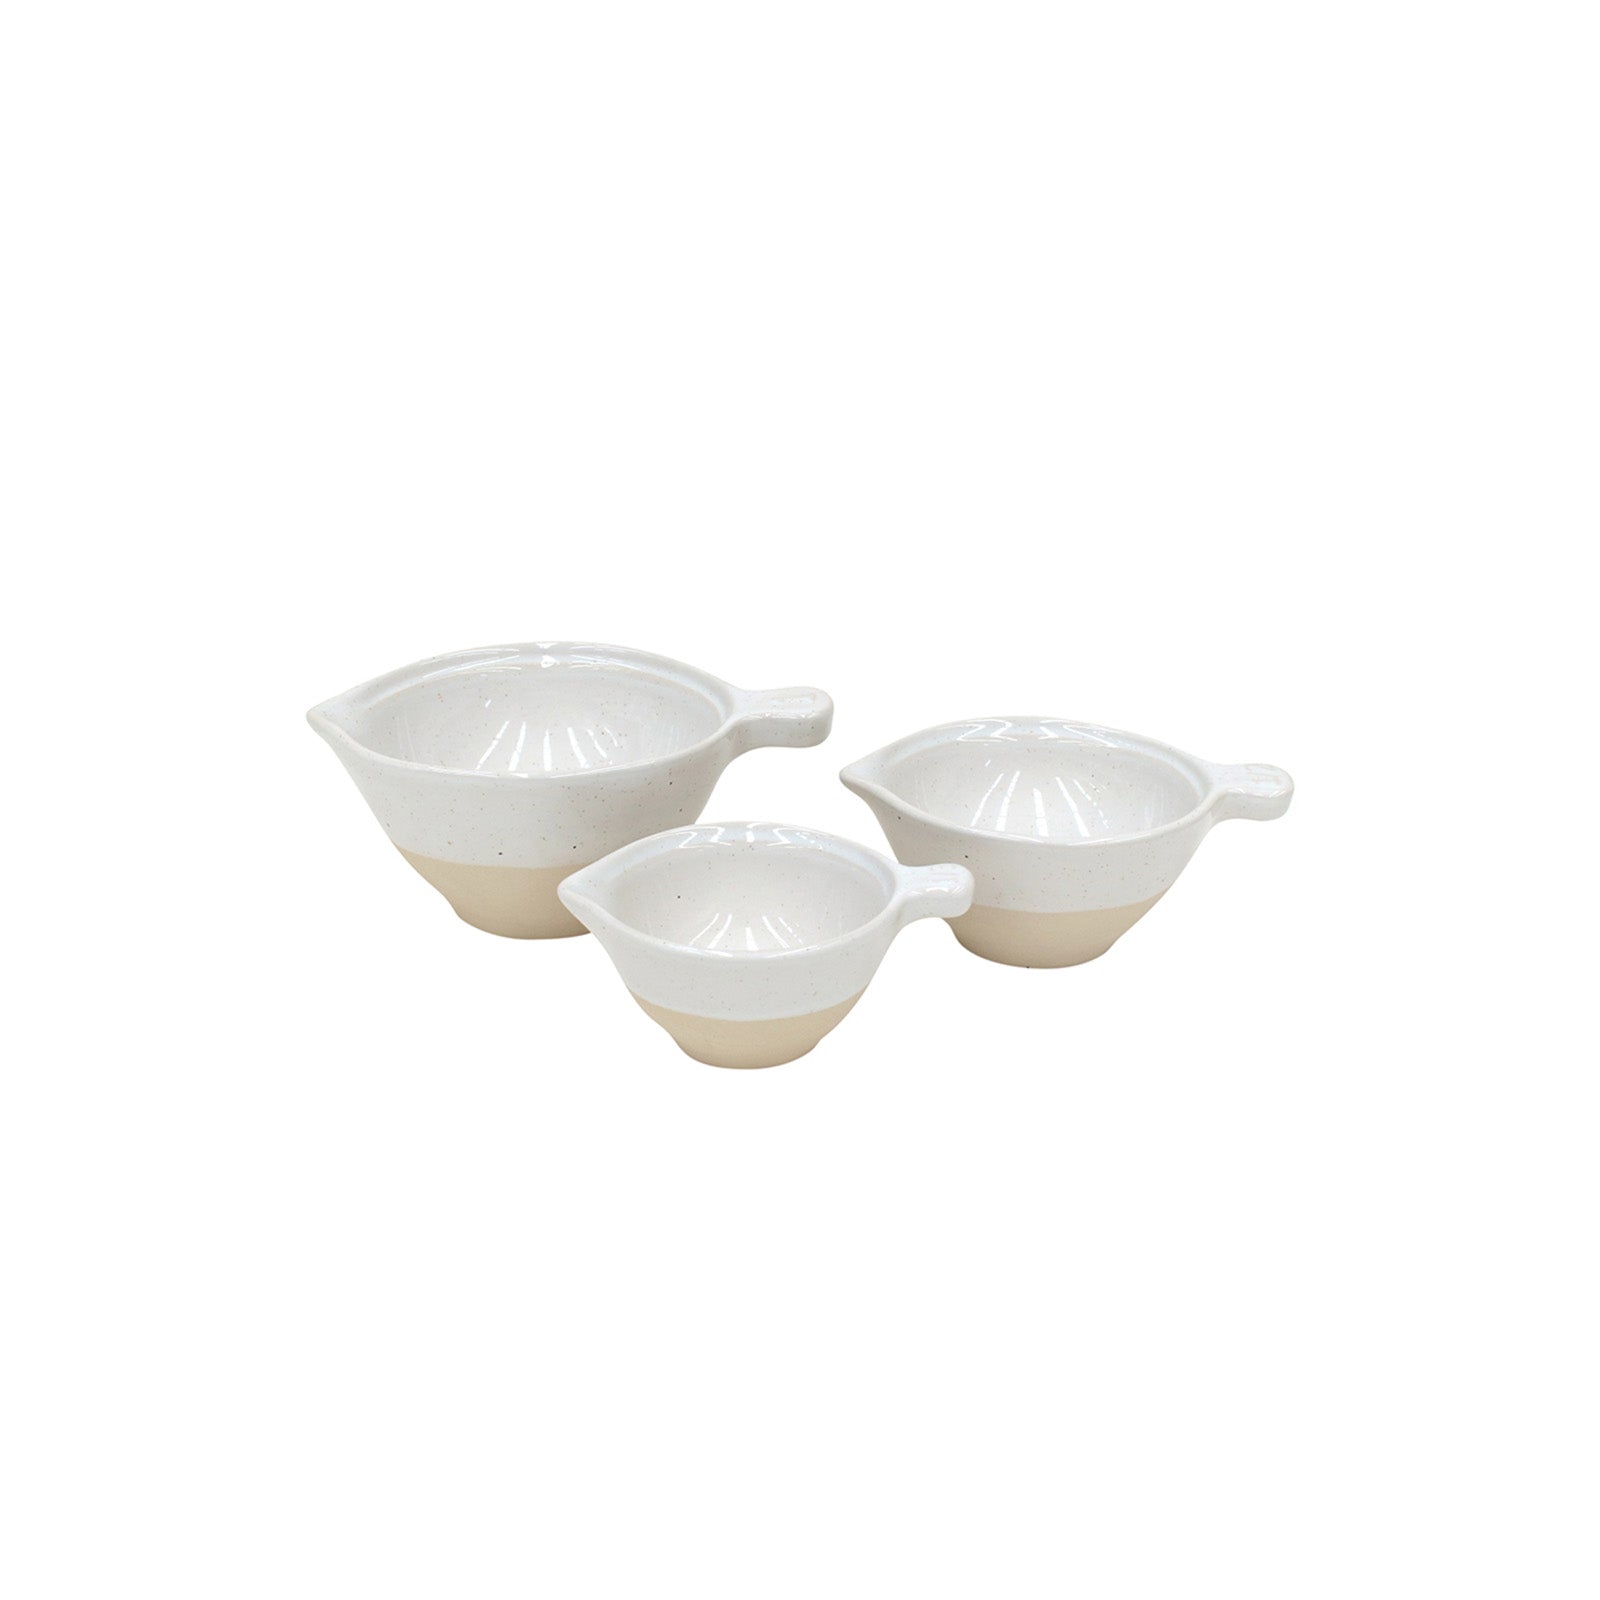 FATTORIA MEAUSRING CUPS SET OF 3